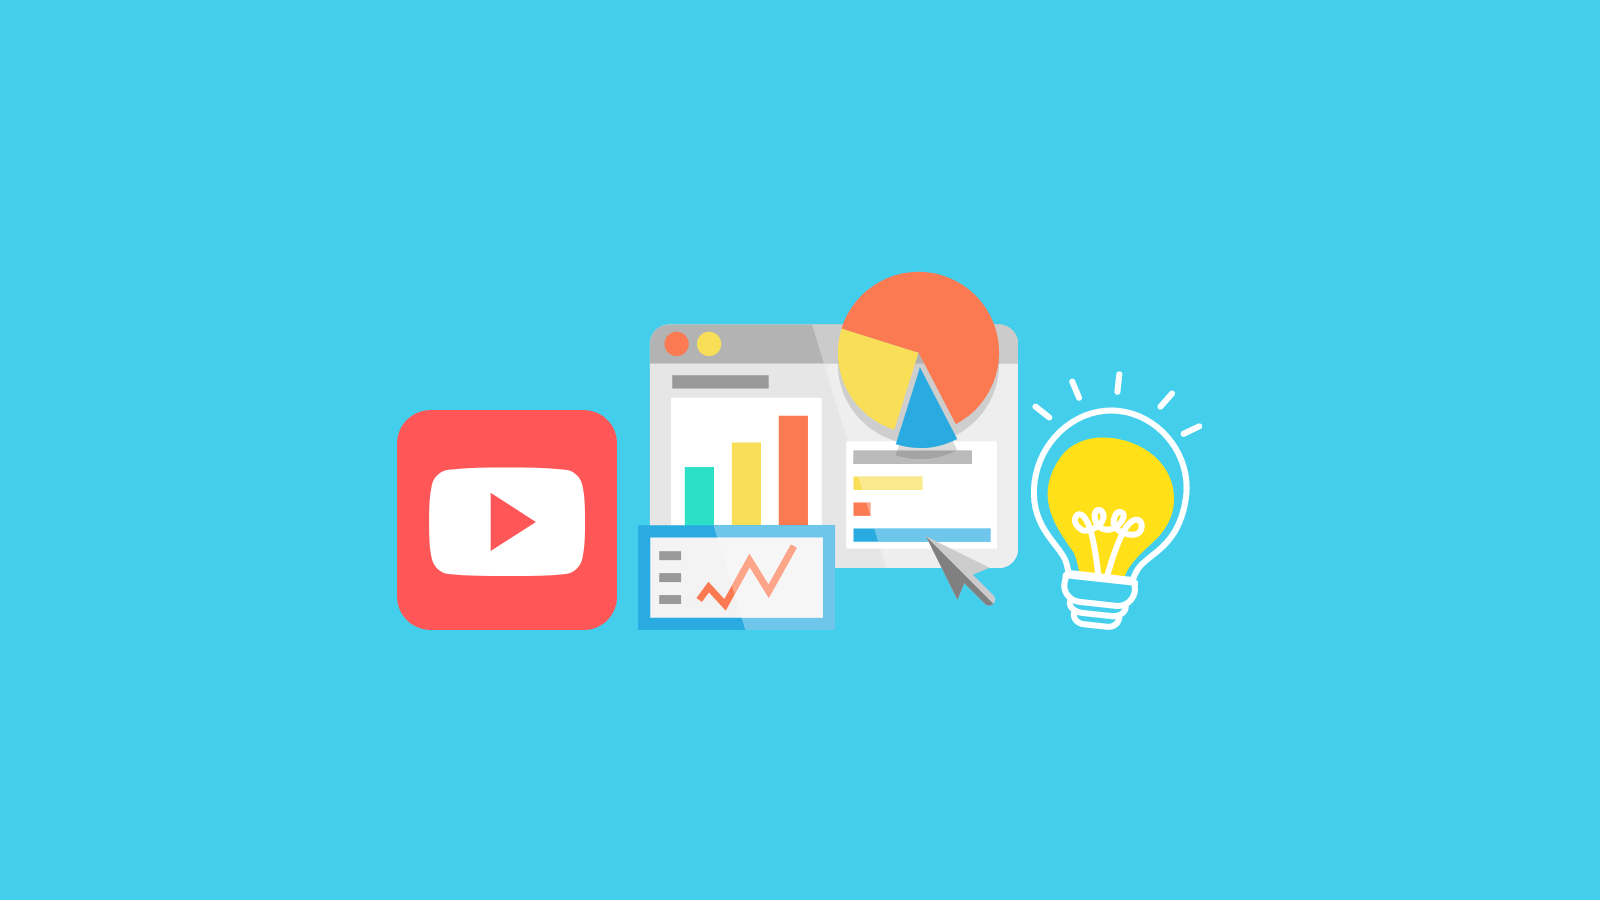 YouTube Analytics to Come up With new Video Ideas